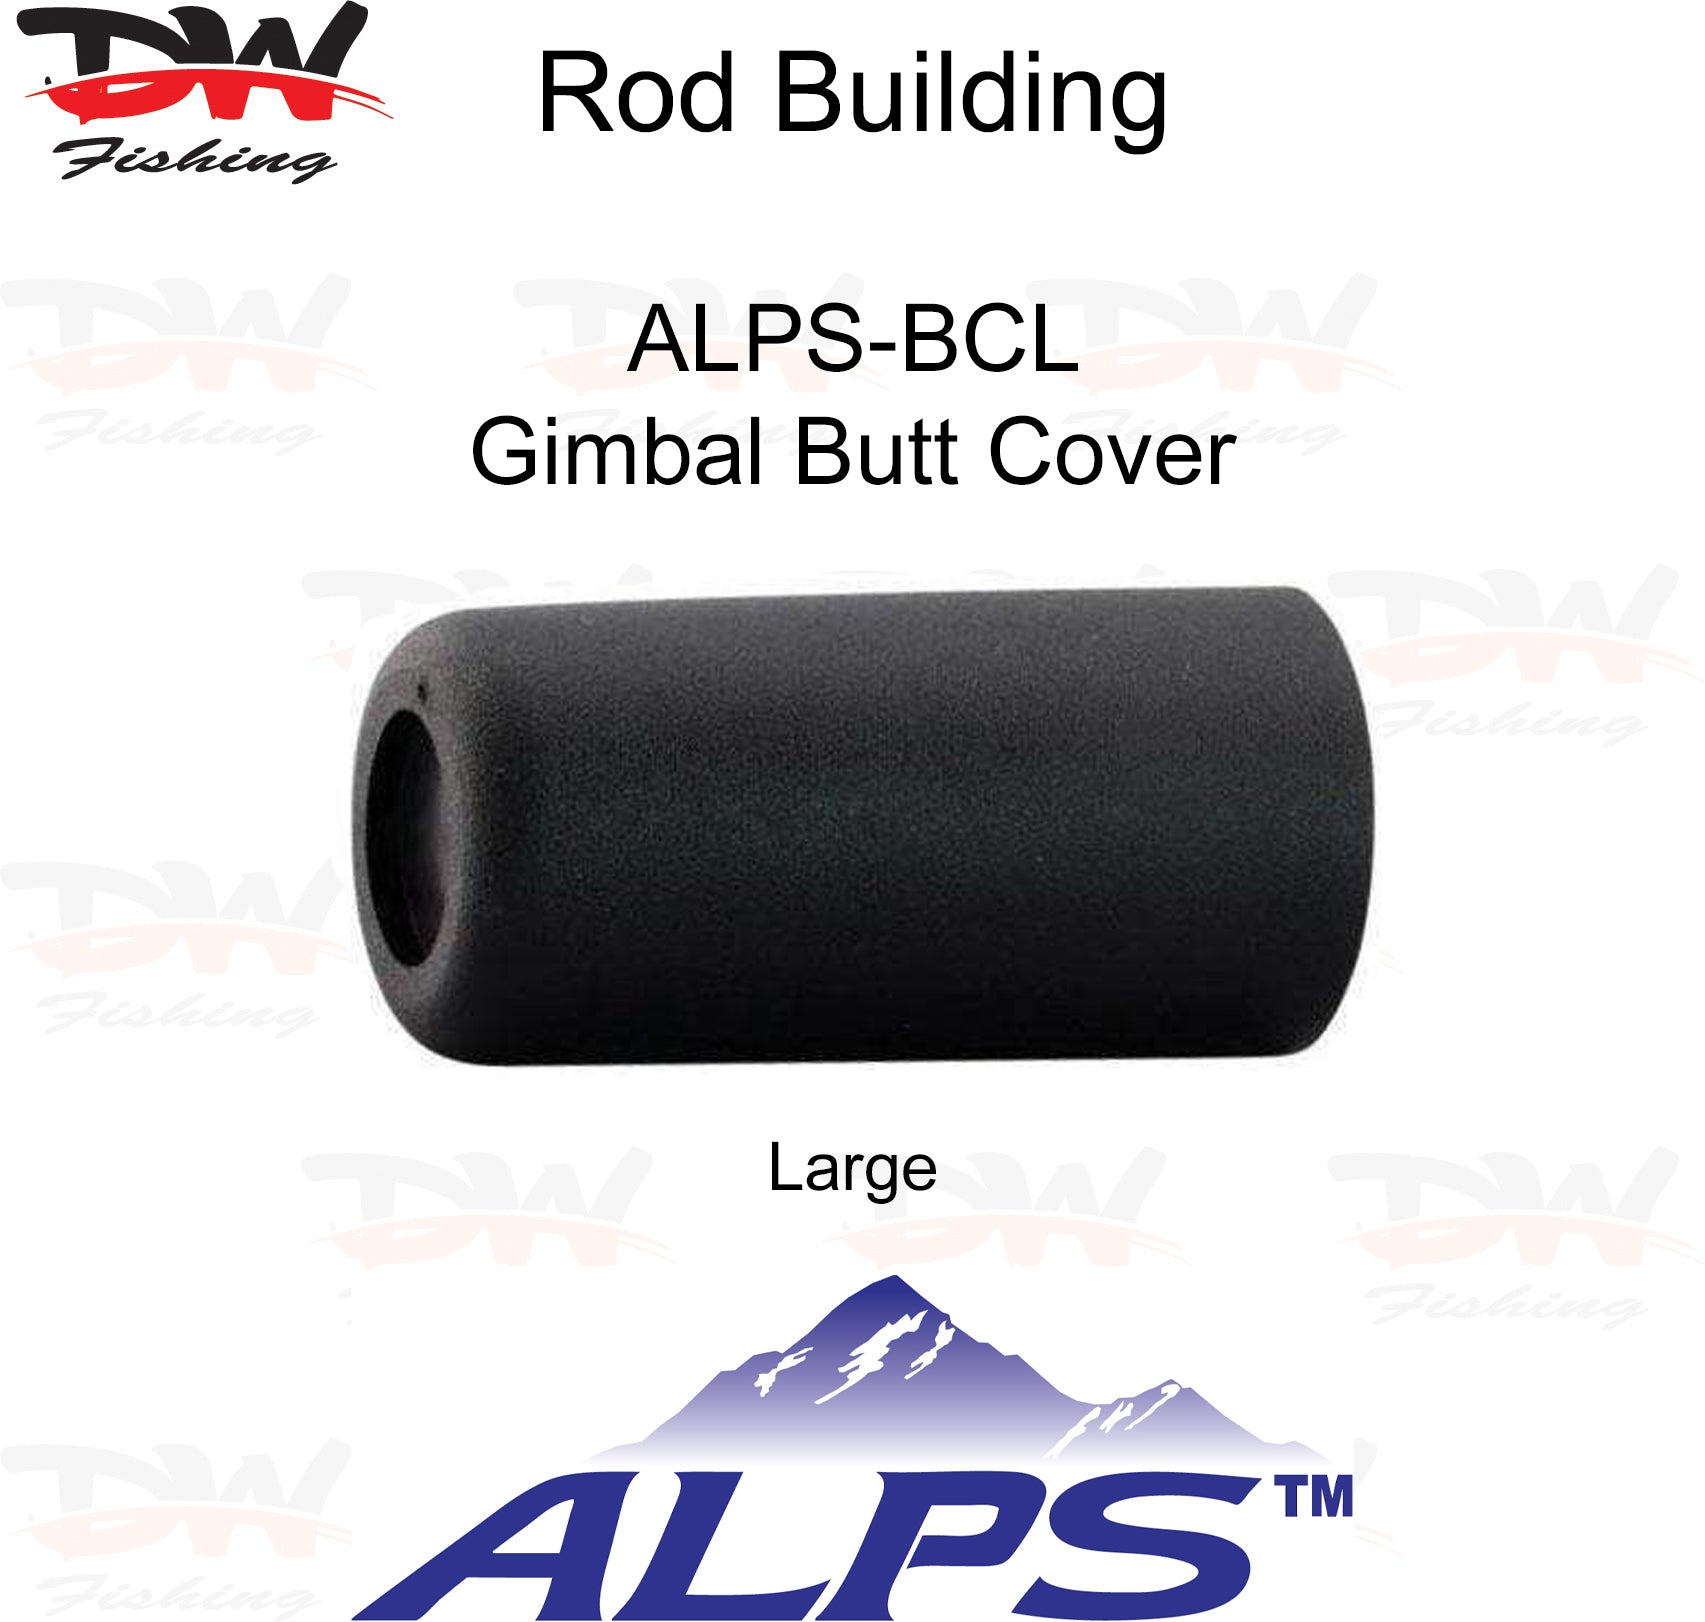 ALPS Gimbal Butt cover BCL Large with ALPS logo below and text above